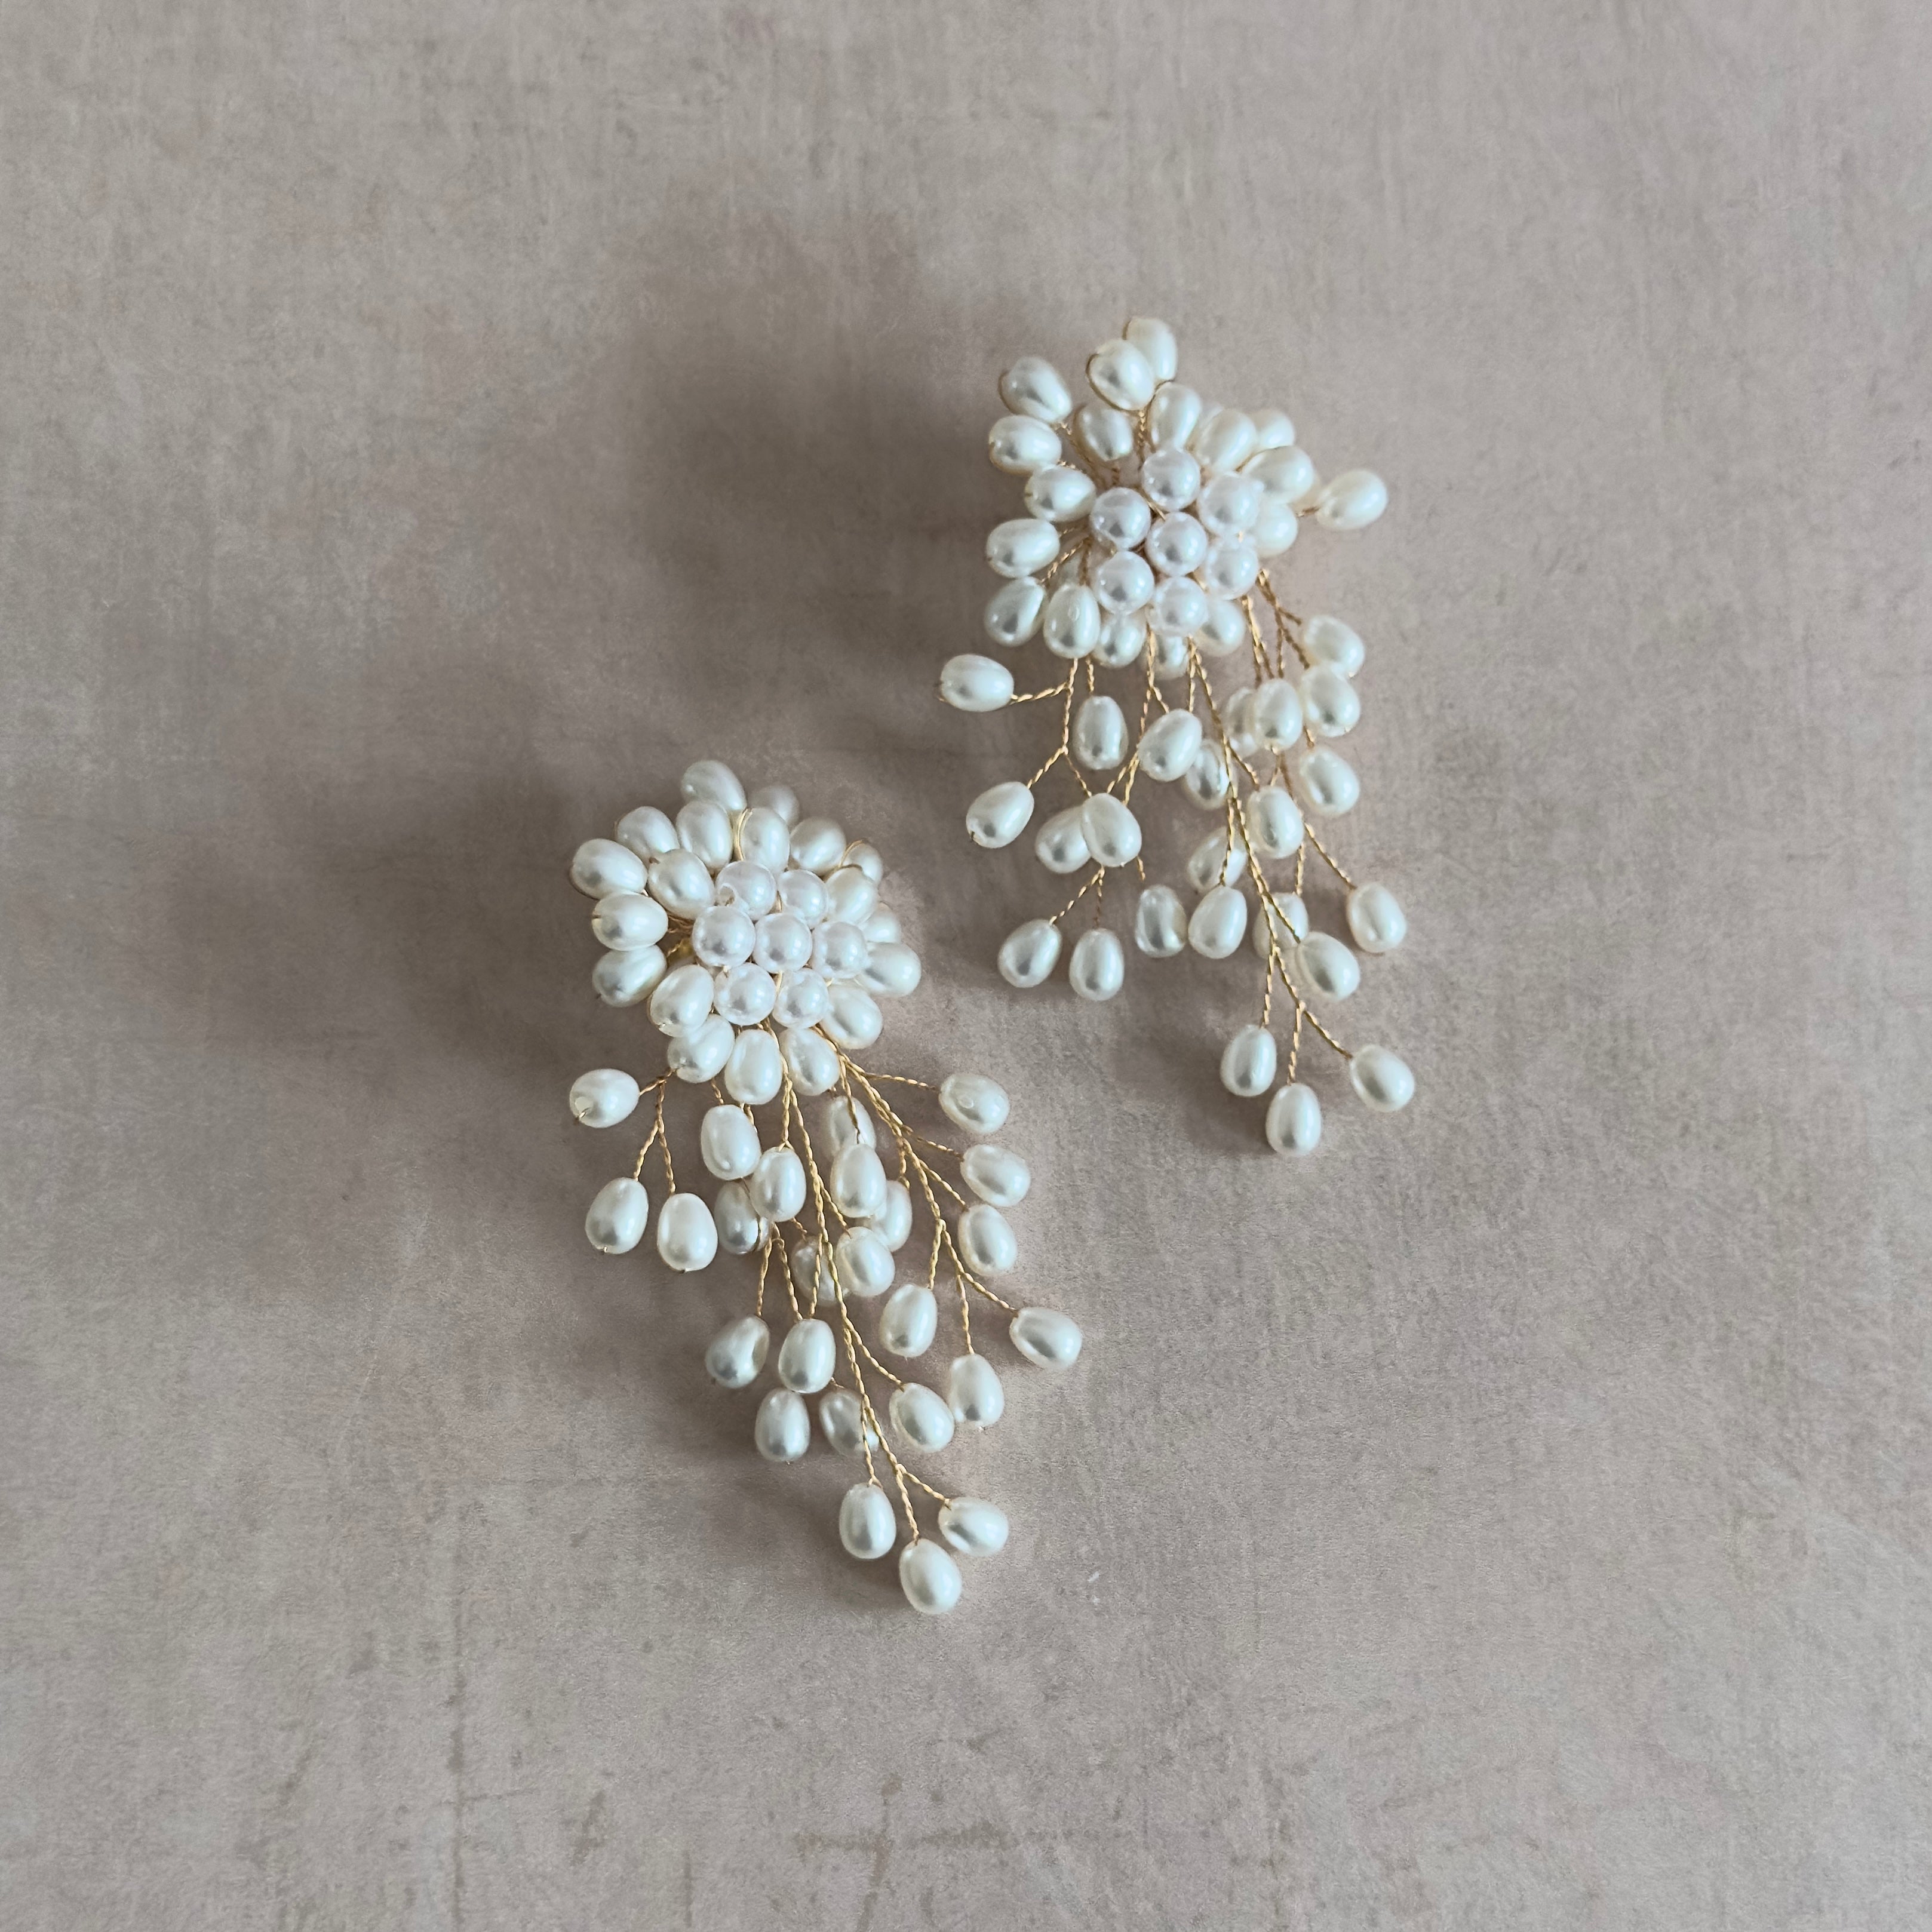 Elevate your look with these Nadia Pearl Earrings. These statement earrings will add a touch of elegance to any outfit, making you feel confident and sophisticated. A must-have for any fashion-forward individual, these earrings are the perfect accessory for any occasion.